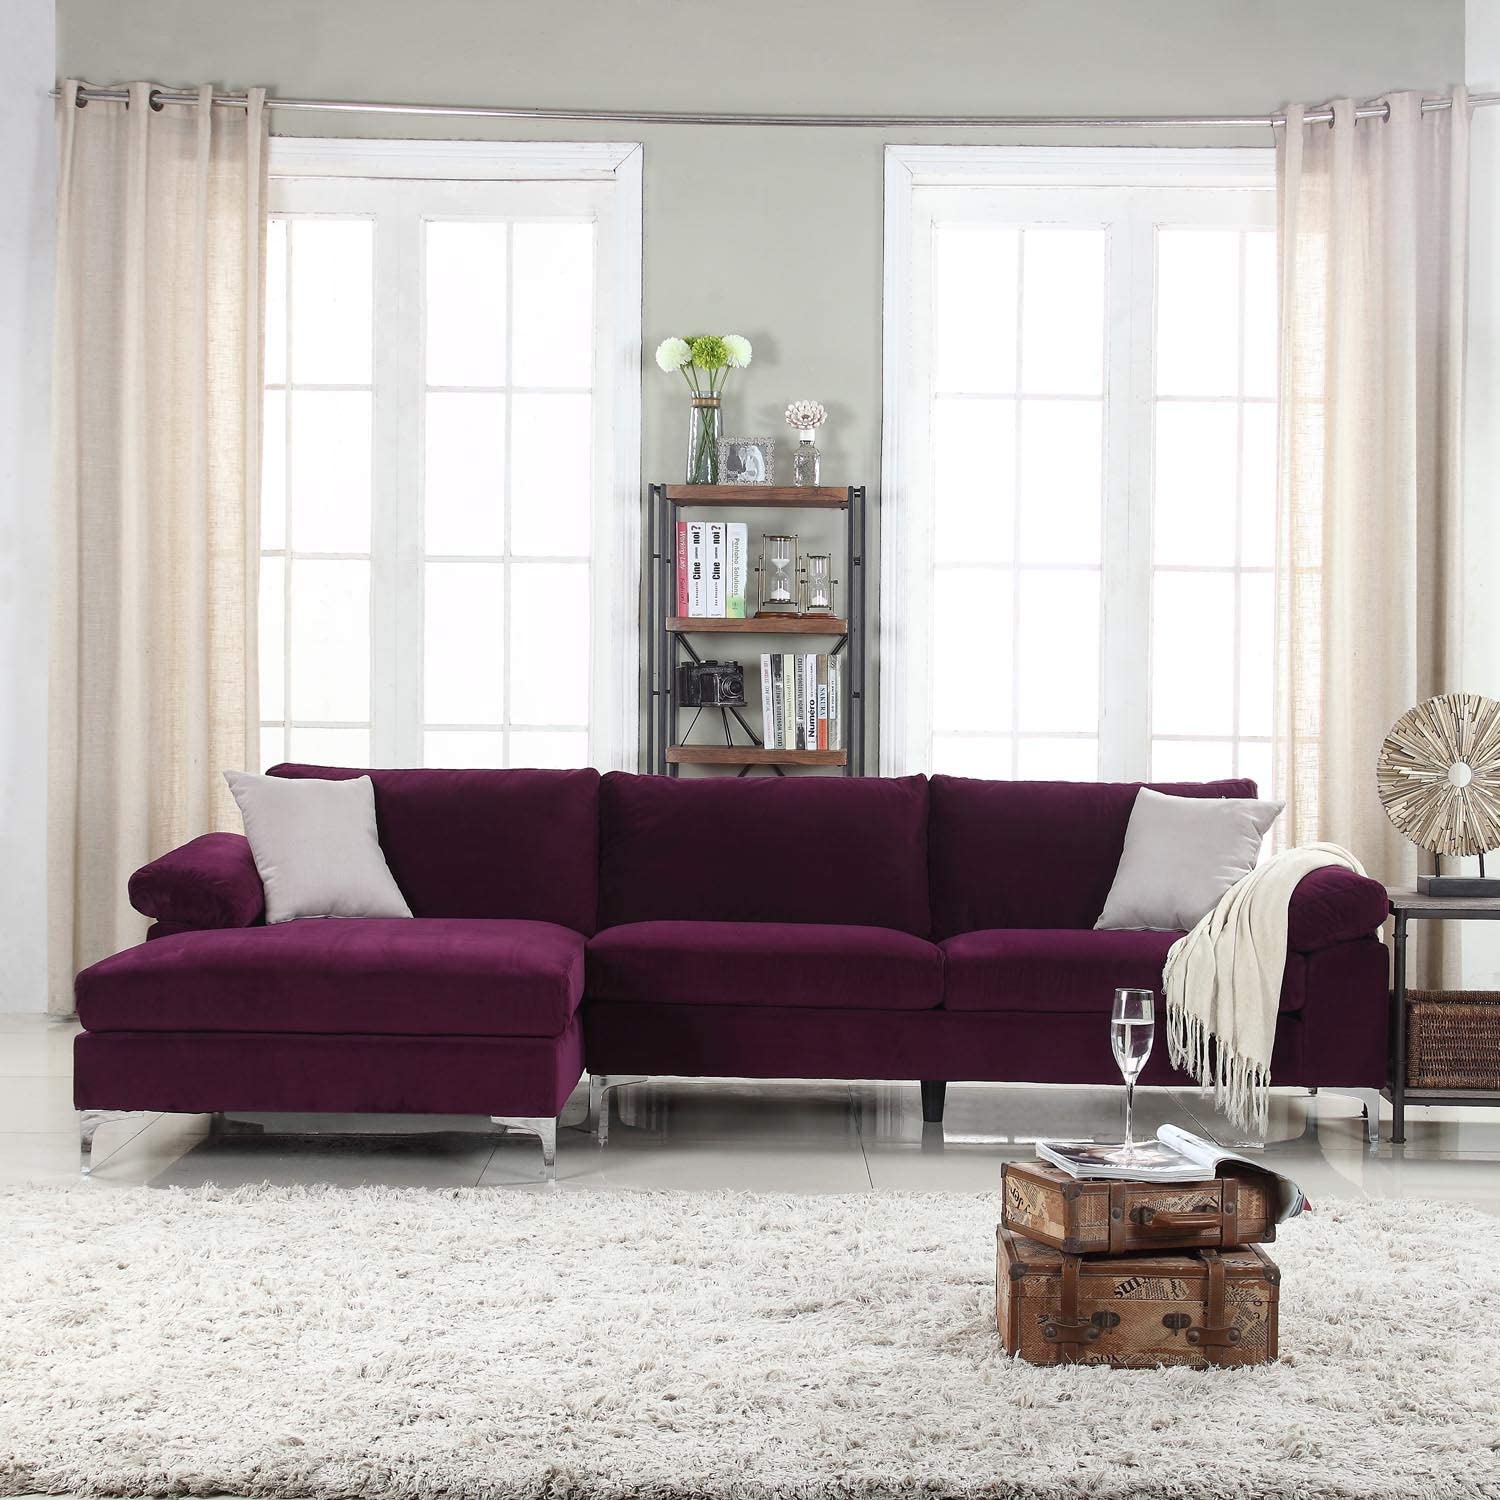 Divano Roma Furniture Modern Large Velvet Fabric Sectional Sofa, L-Shape Couch with Extra Wide Chaise Lounge (Purple)